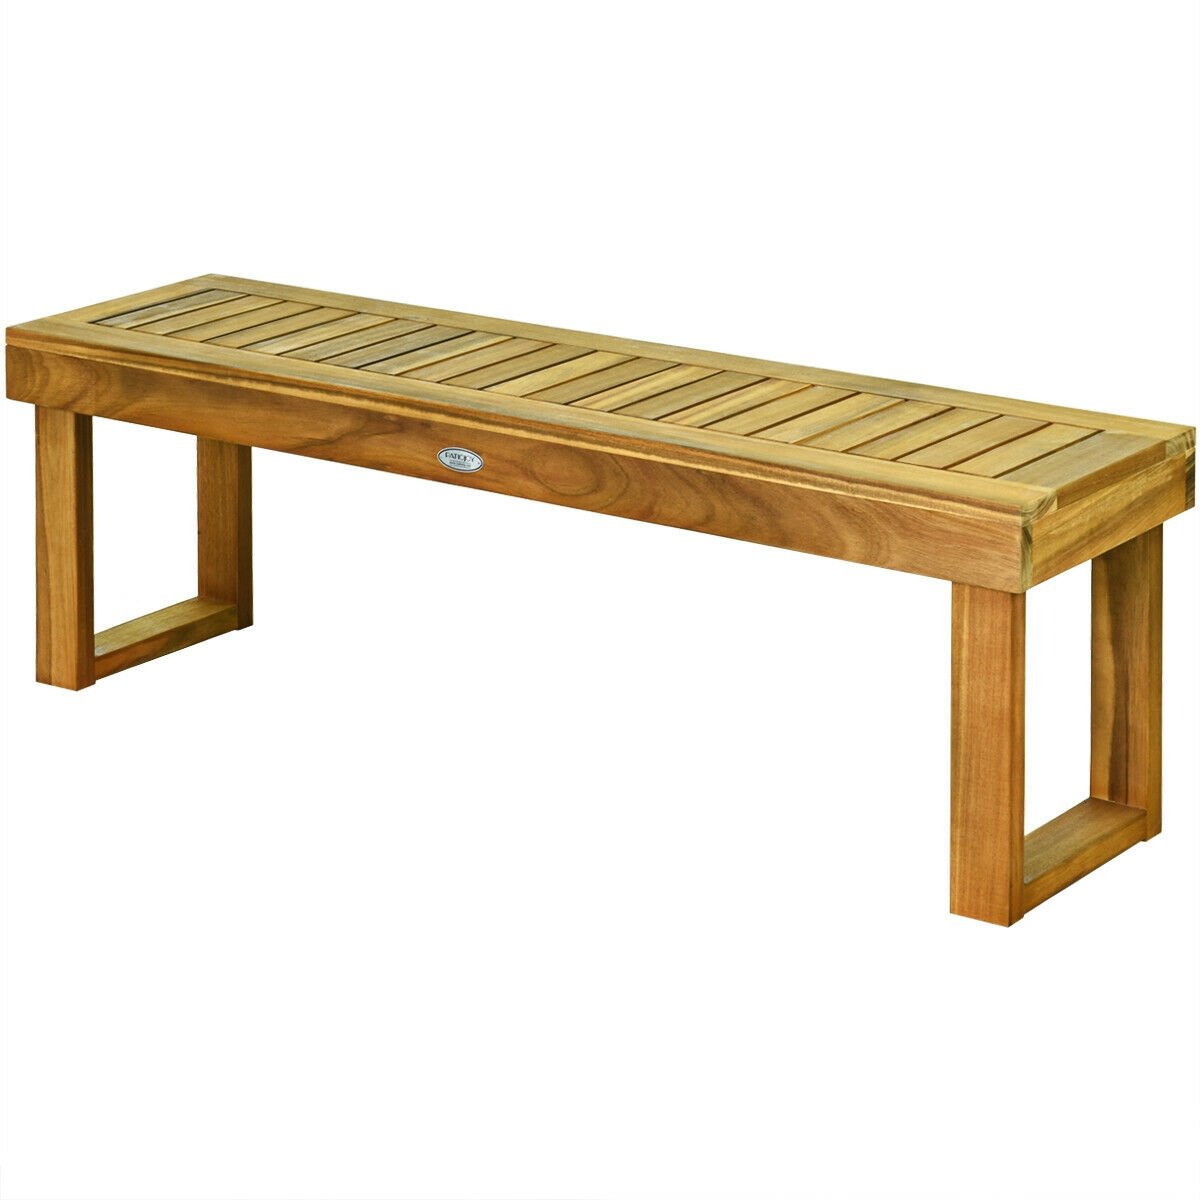 52 Inch Acacia Wood Dining Bench with Slatted Seat, Brown - Gallery Canada